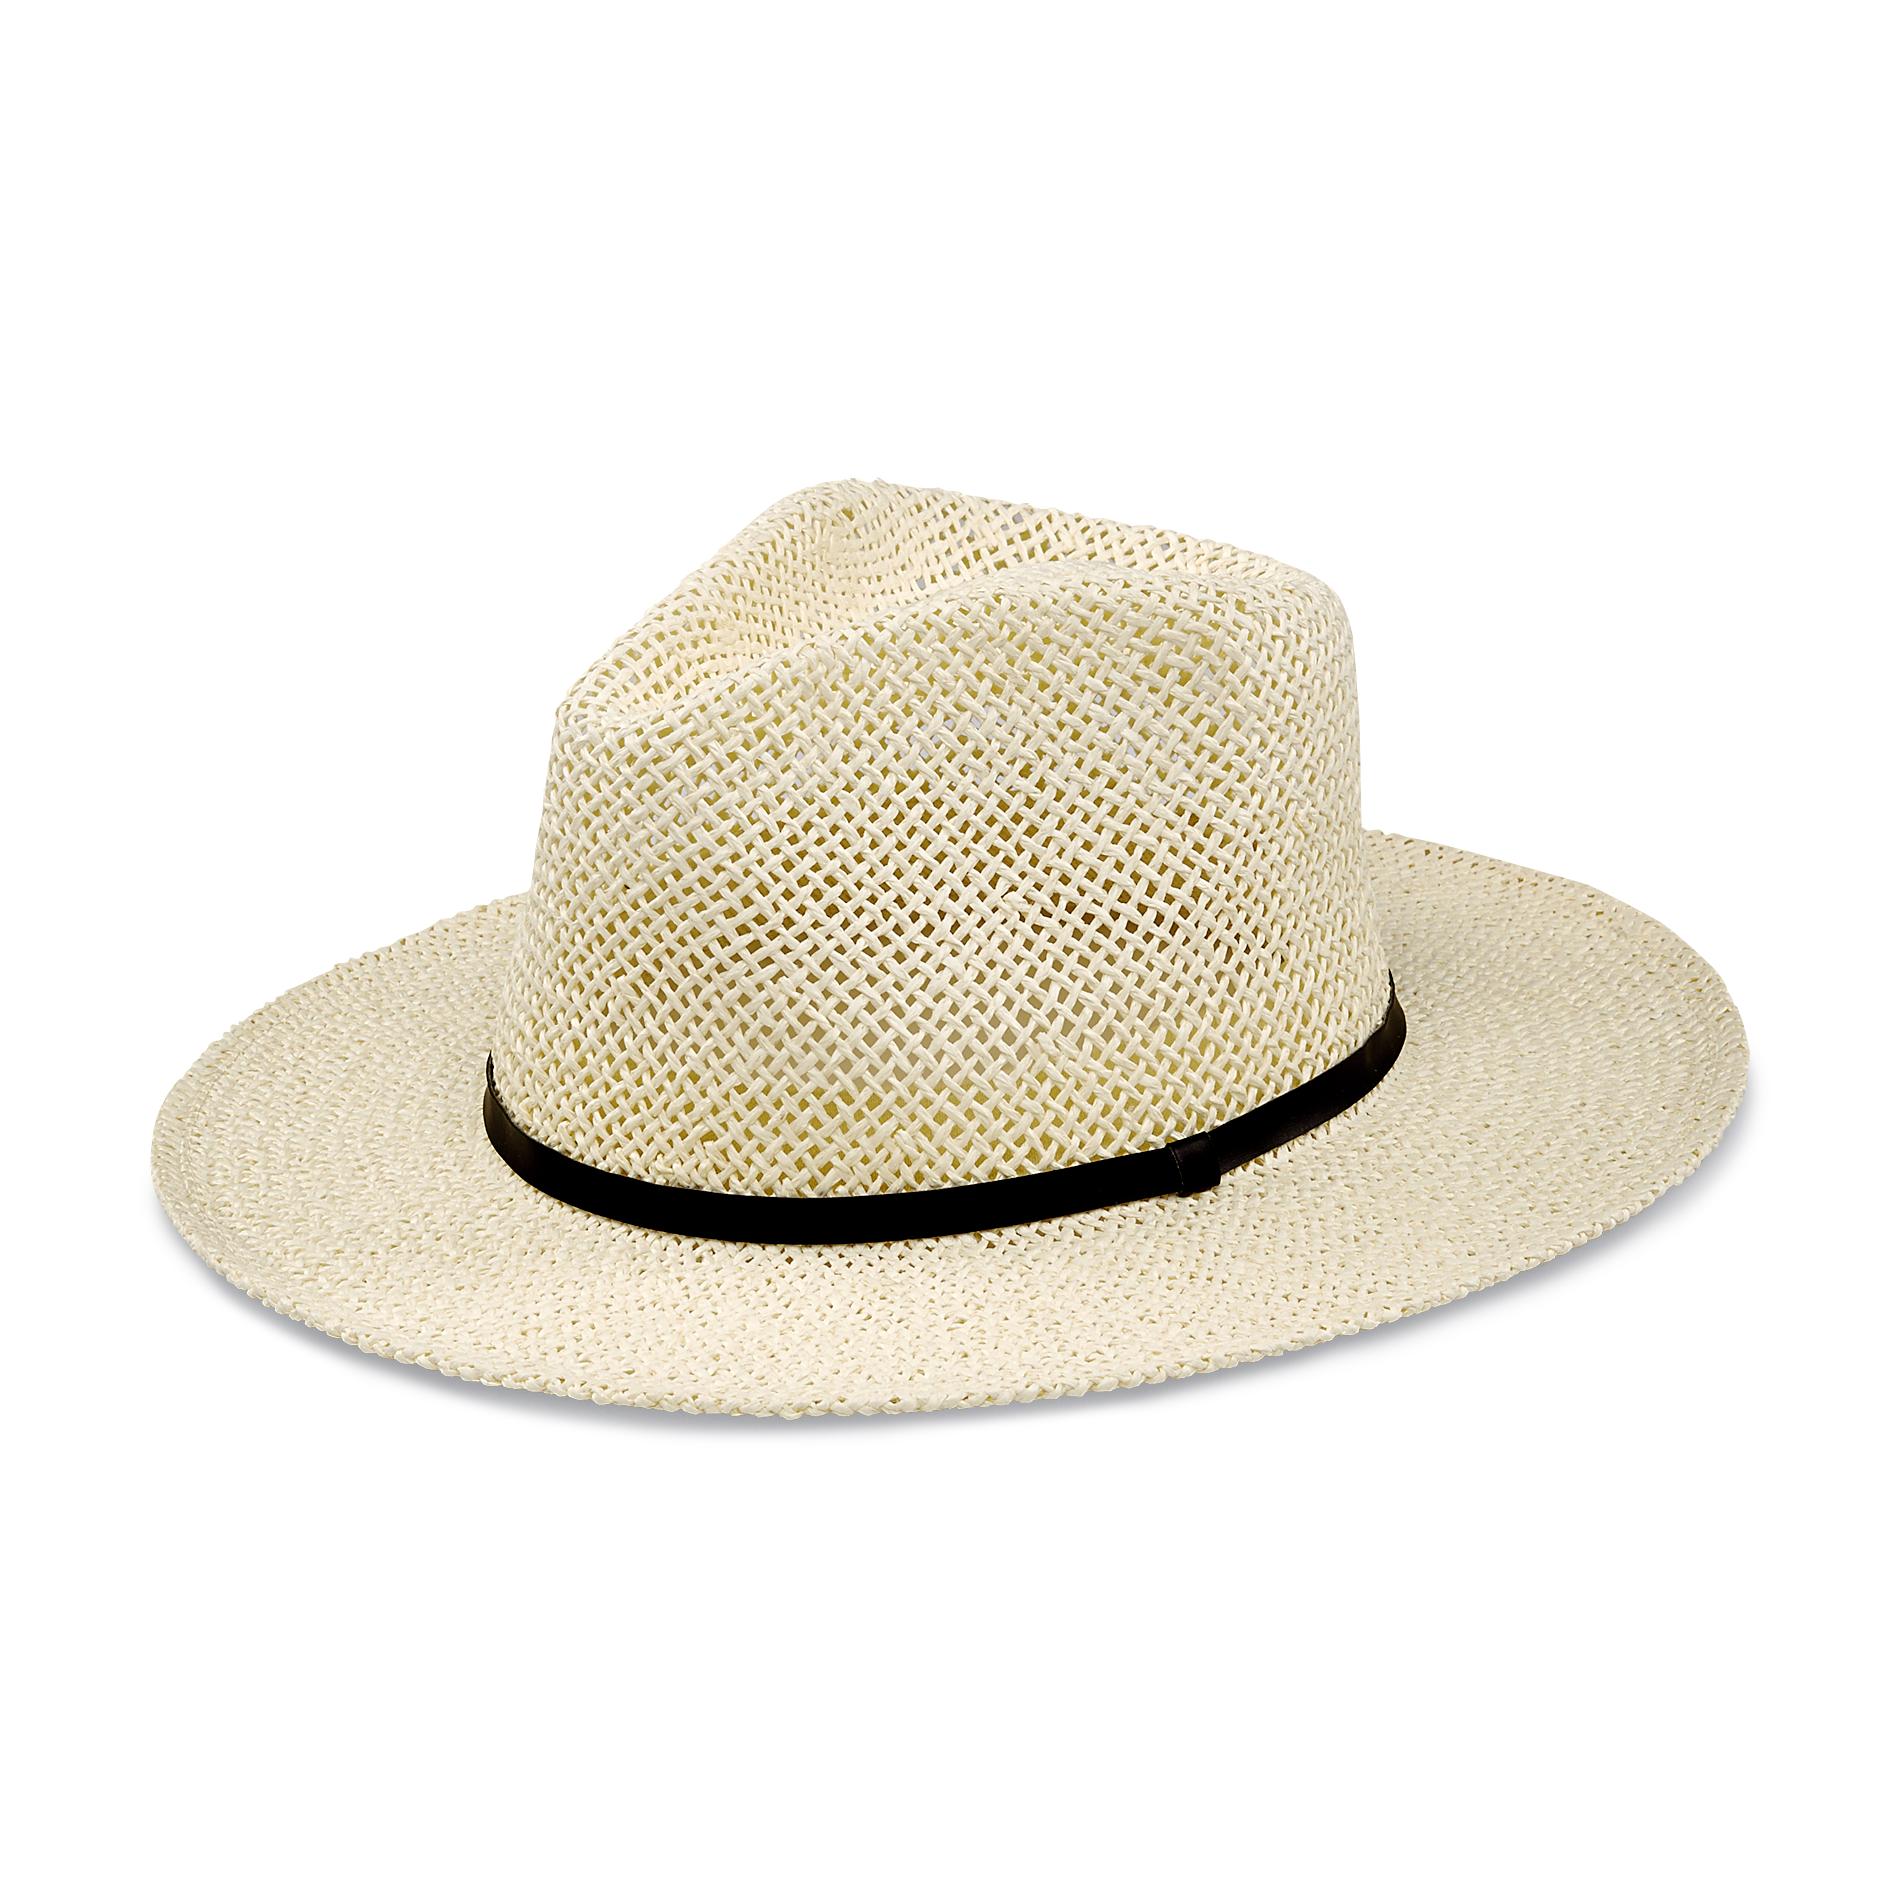 Men's Straw Outback Hat